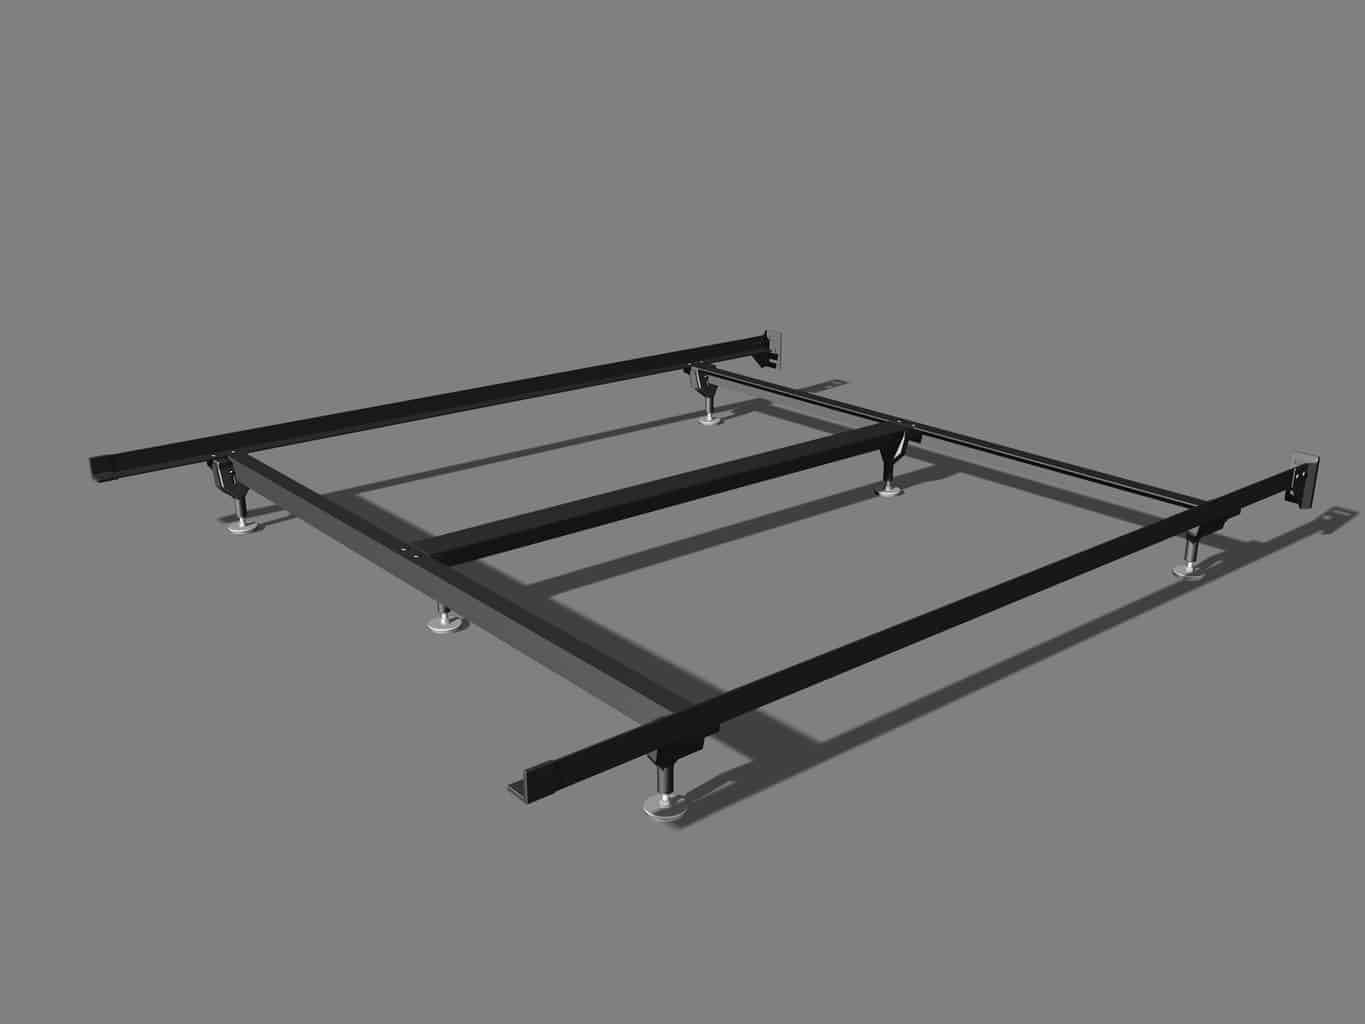 Mantua's top of the line bed frame